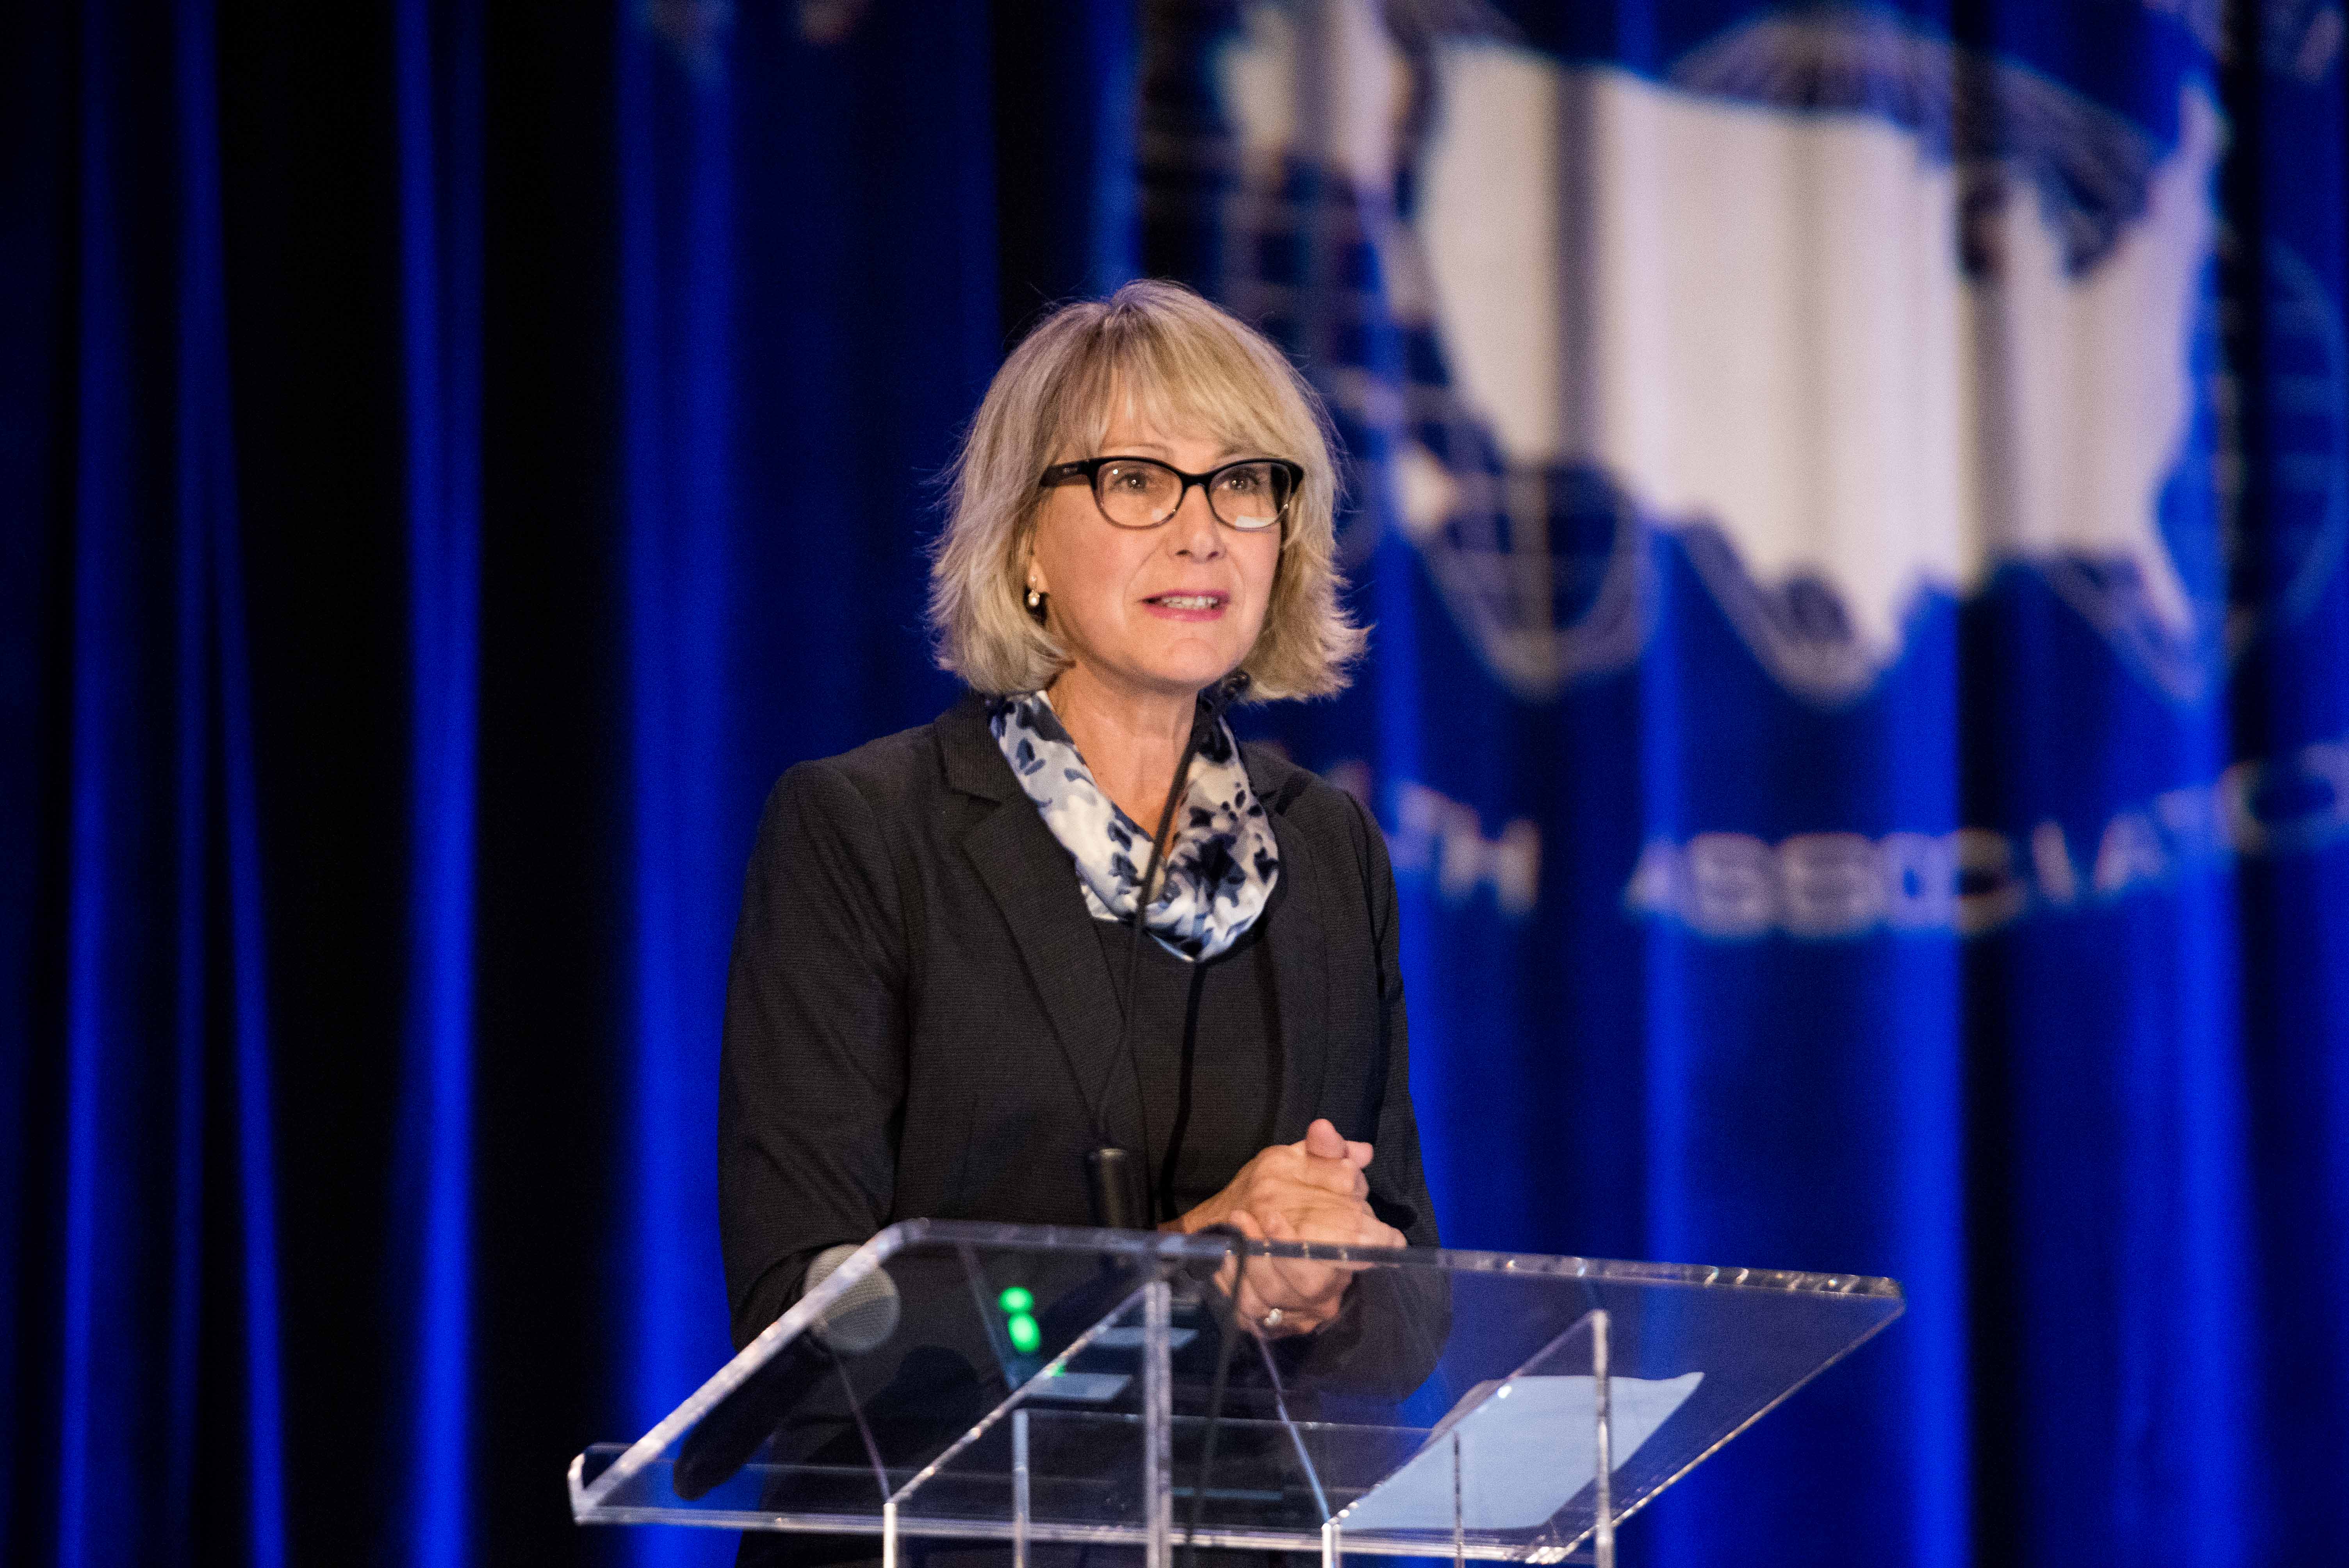 Dr. Michèle Prévost presents at the 2019 Legionella Conference held in Los Angeles. Dr. Prévost is Professor and Industrial Chair for Drinking Water of the Natural Sciences and Engineering Council of Canada and Civil Engineering Industrial Chair for Polytechnique Montréal.

Photo credit: NSF Health Sciences